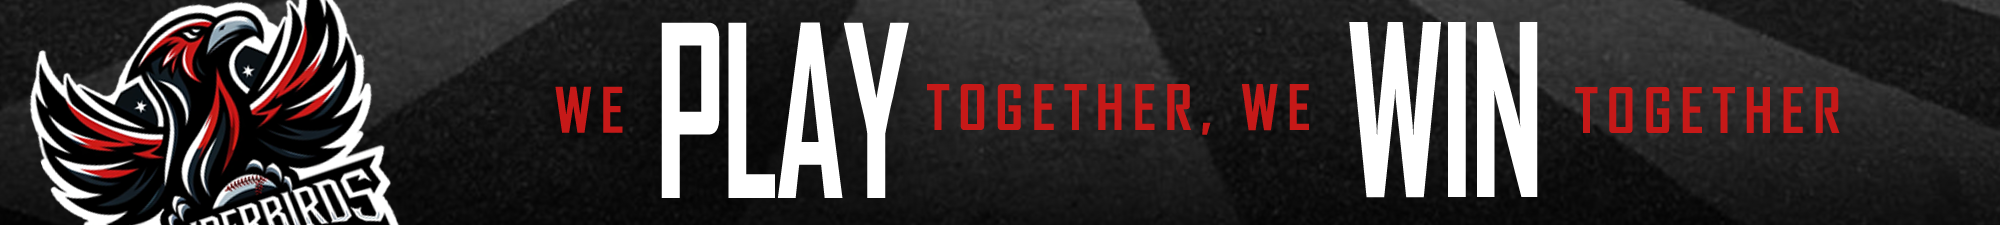 Together-We-Win!